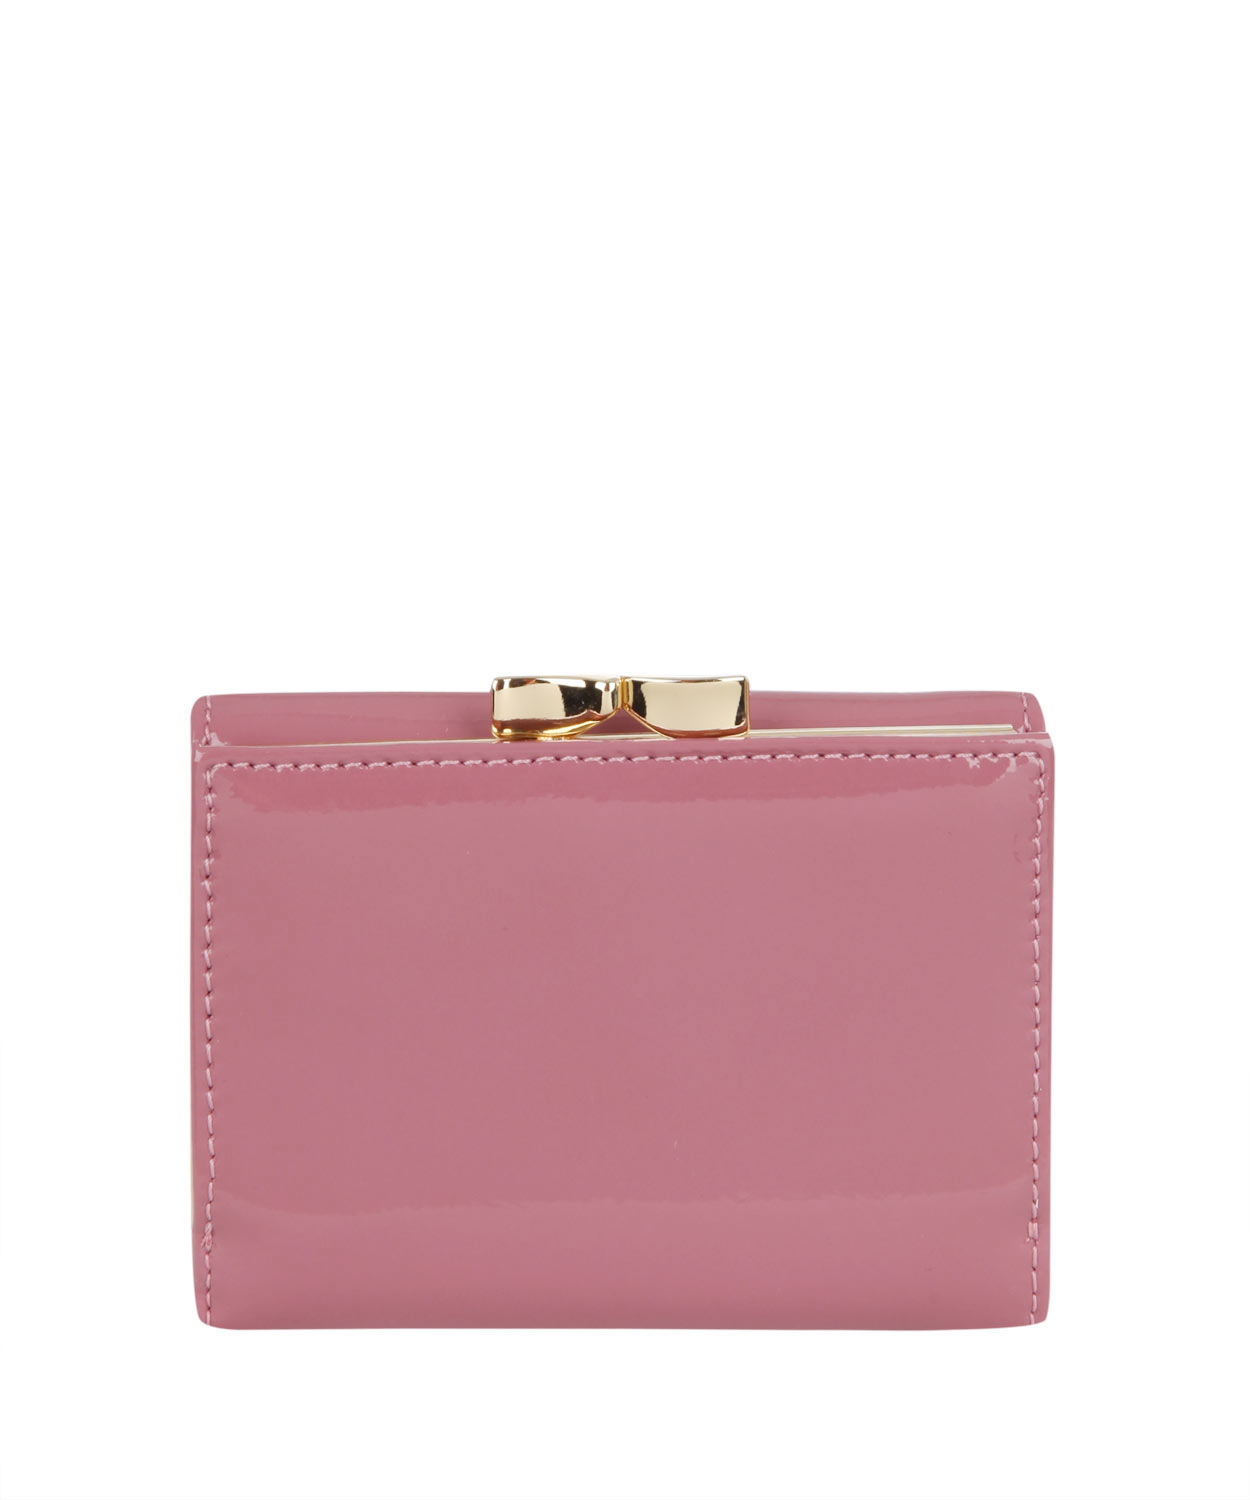 Lyst - Vivienne Westwood Pink Patent Leather Ebury Clip Purse in Pink